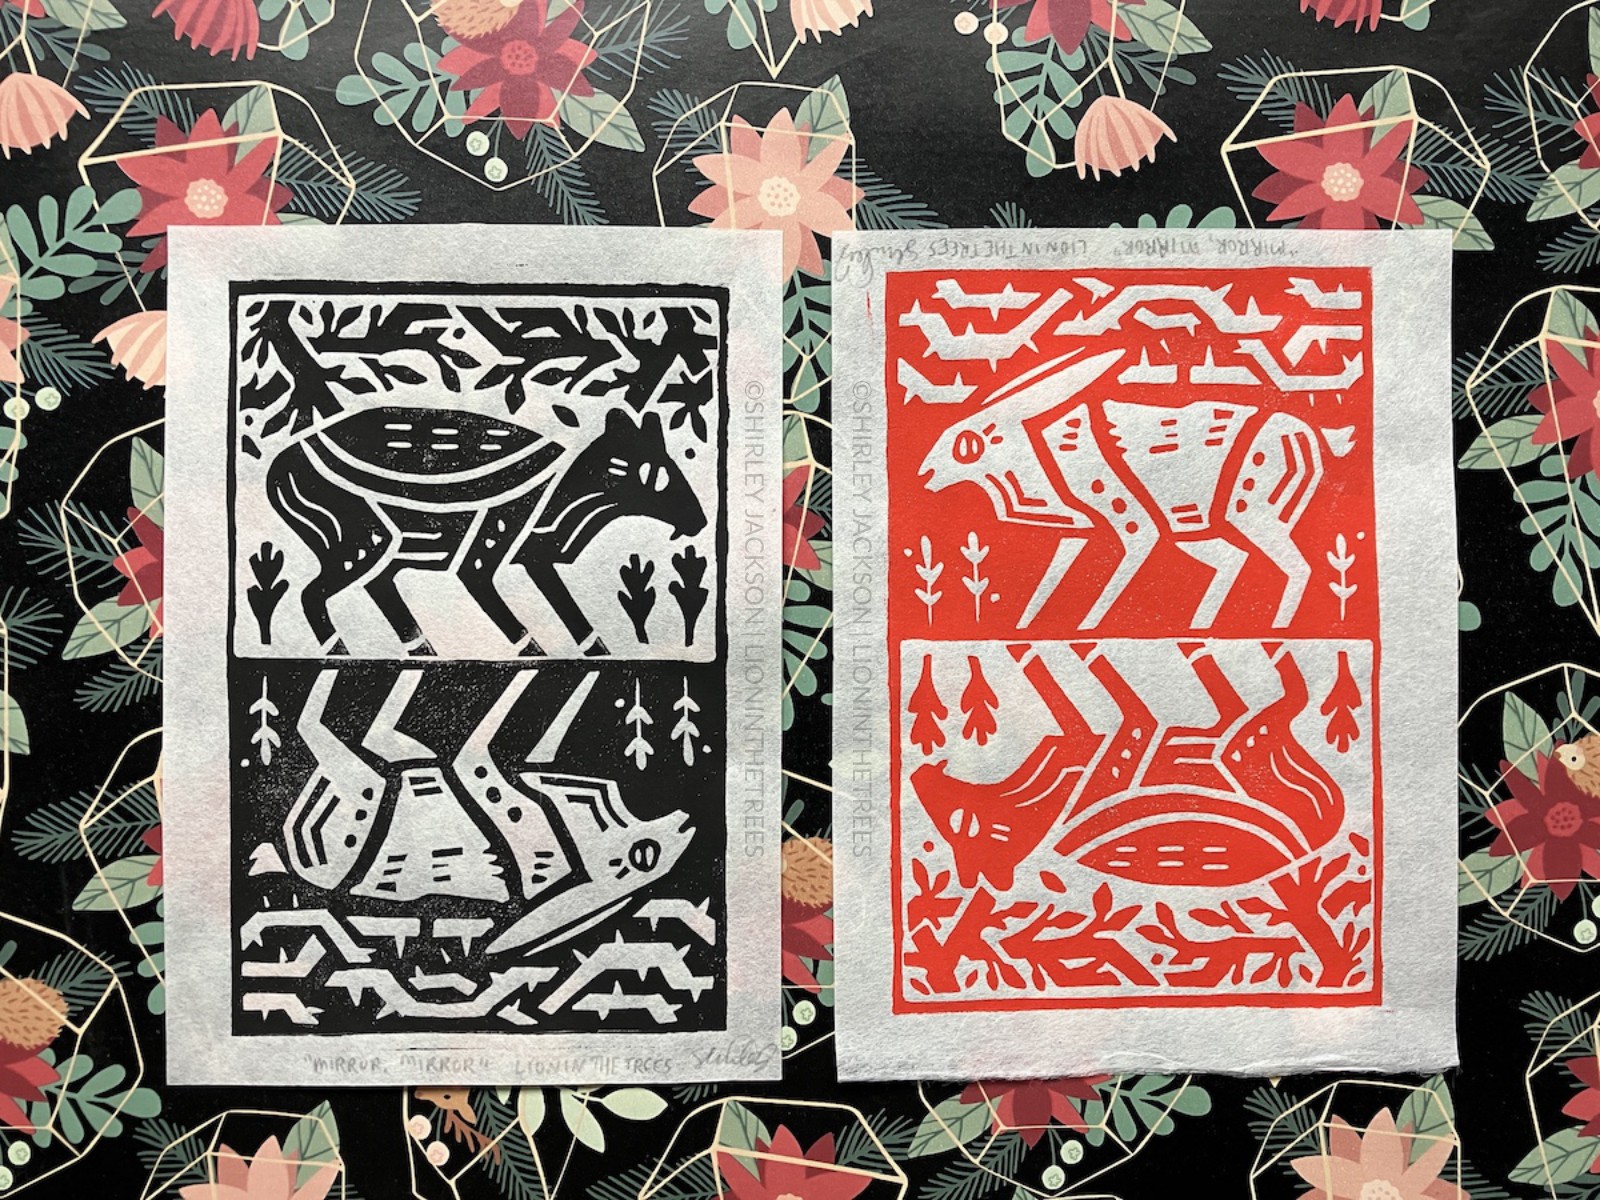 A photo showing both colour variants of the Sang Kancil print. There is a black one on the left and a red one on the right. The print features two animals mirroring one another. At the top of the print is Sang Kancil, a small Mouse-Deer. They are printed in black against white with tree branches and leaves above them. Mirror reflected below Sang Kancil is Br'er Rabbit. Br'er Rabbit is printed white against black and features barbed branches of a briar bush instead of tree branches and leaves.